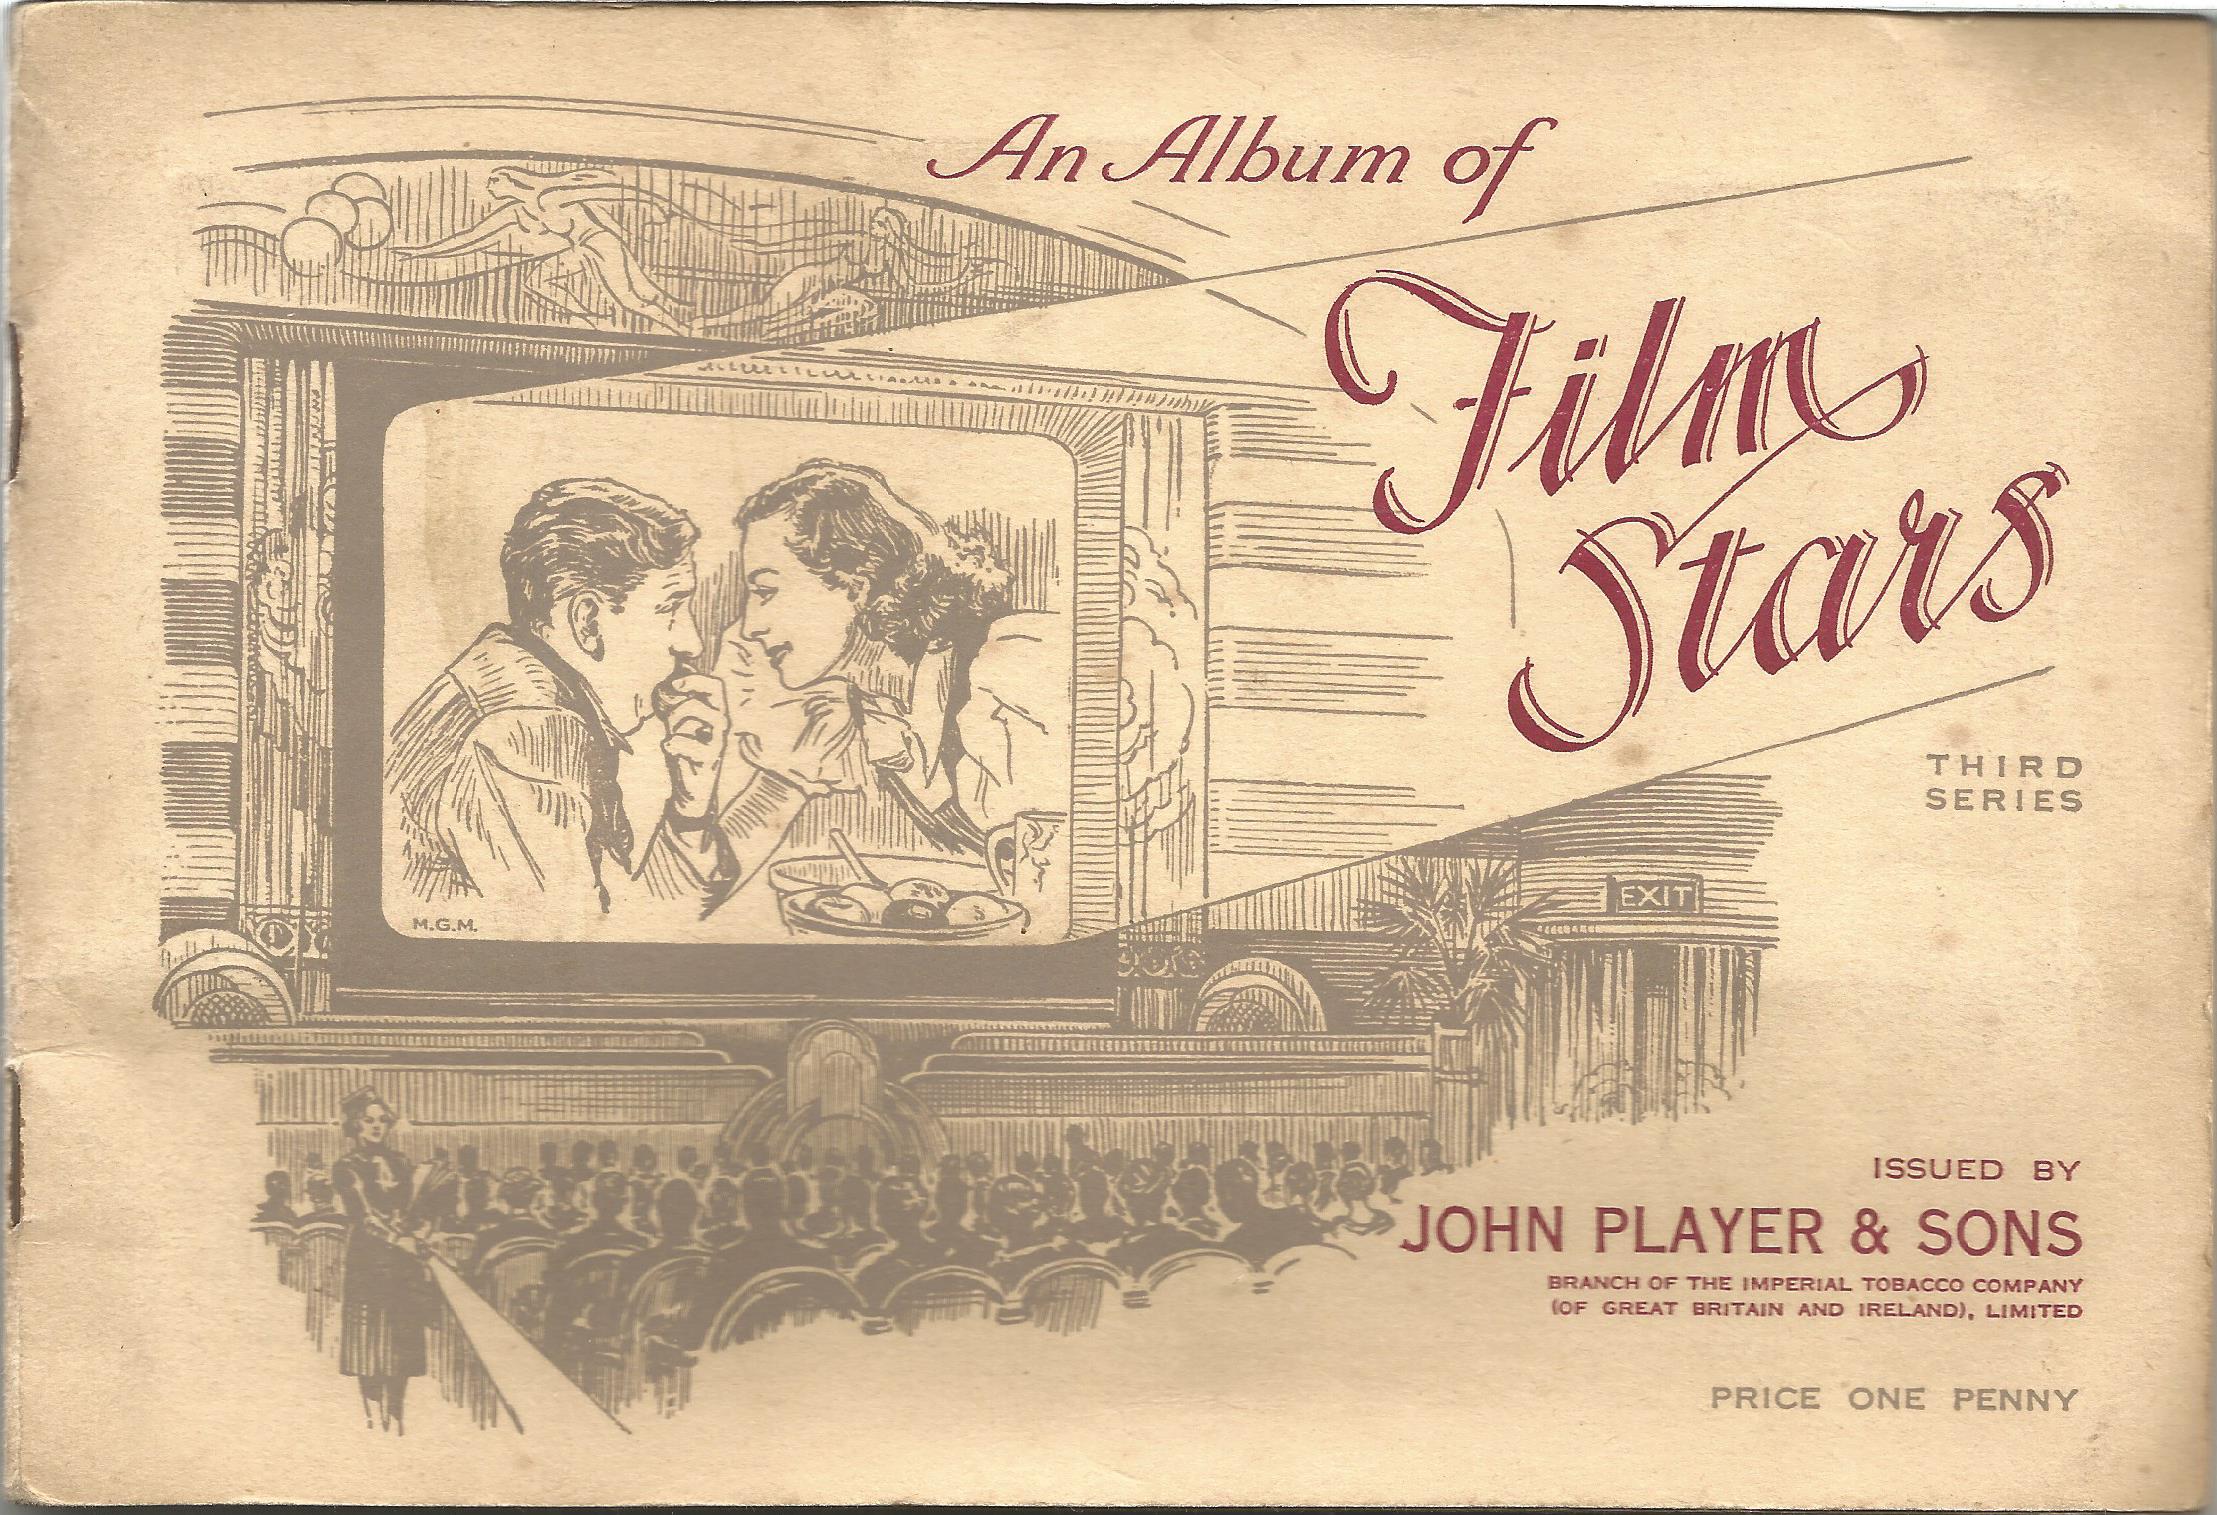 Player's Cigarette Cards, Album of Film Stars, 1934, 50 cards. Good condition. We combine postage on